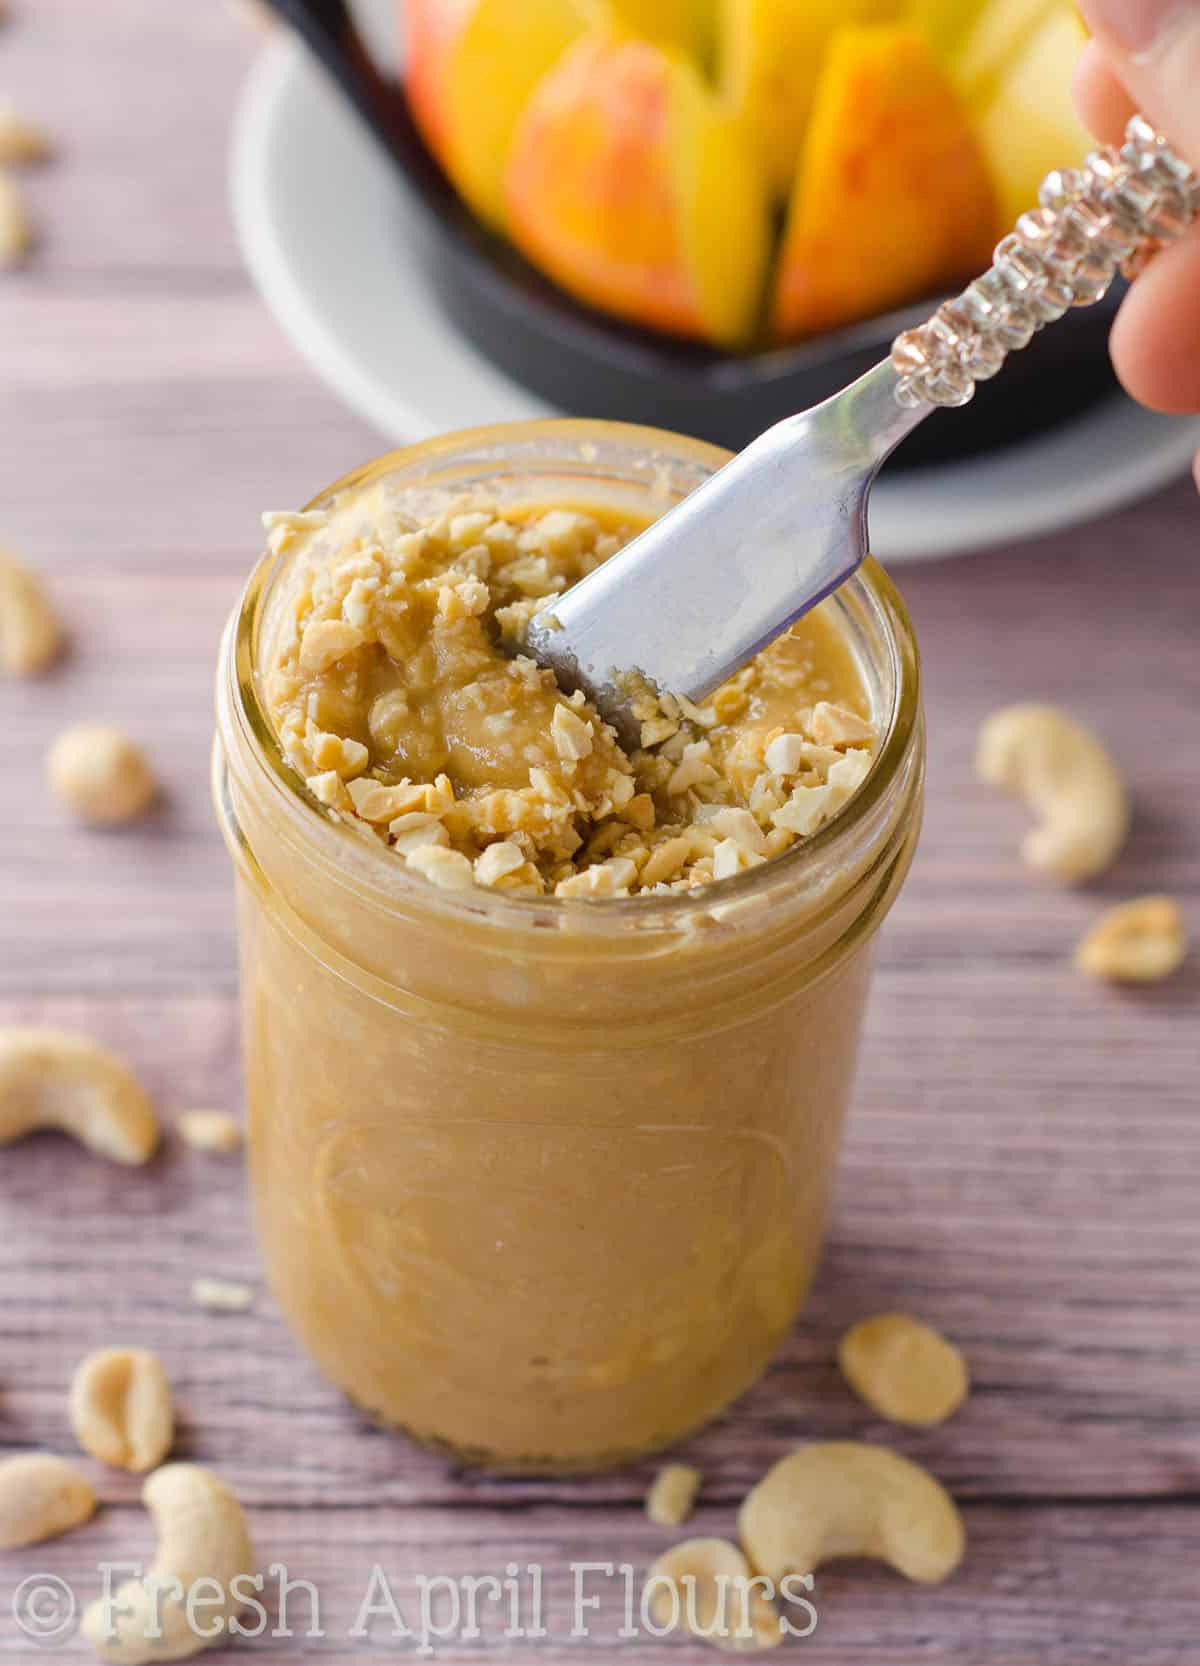 A jar of salted honey cashew peanut butter with a hand dipping a spreader into it.